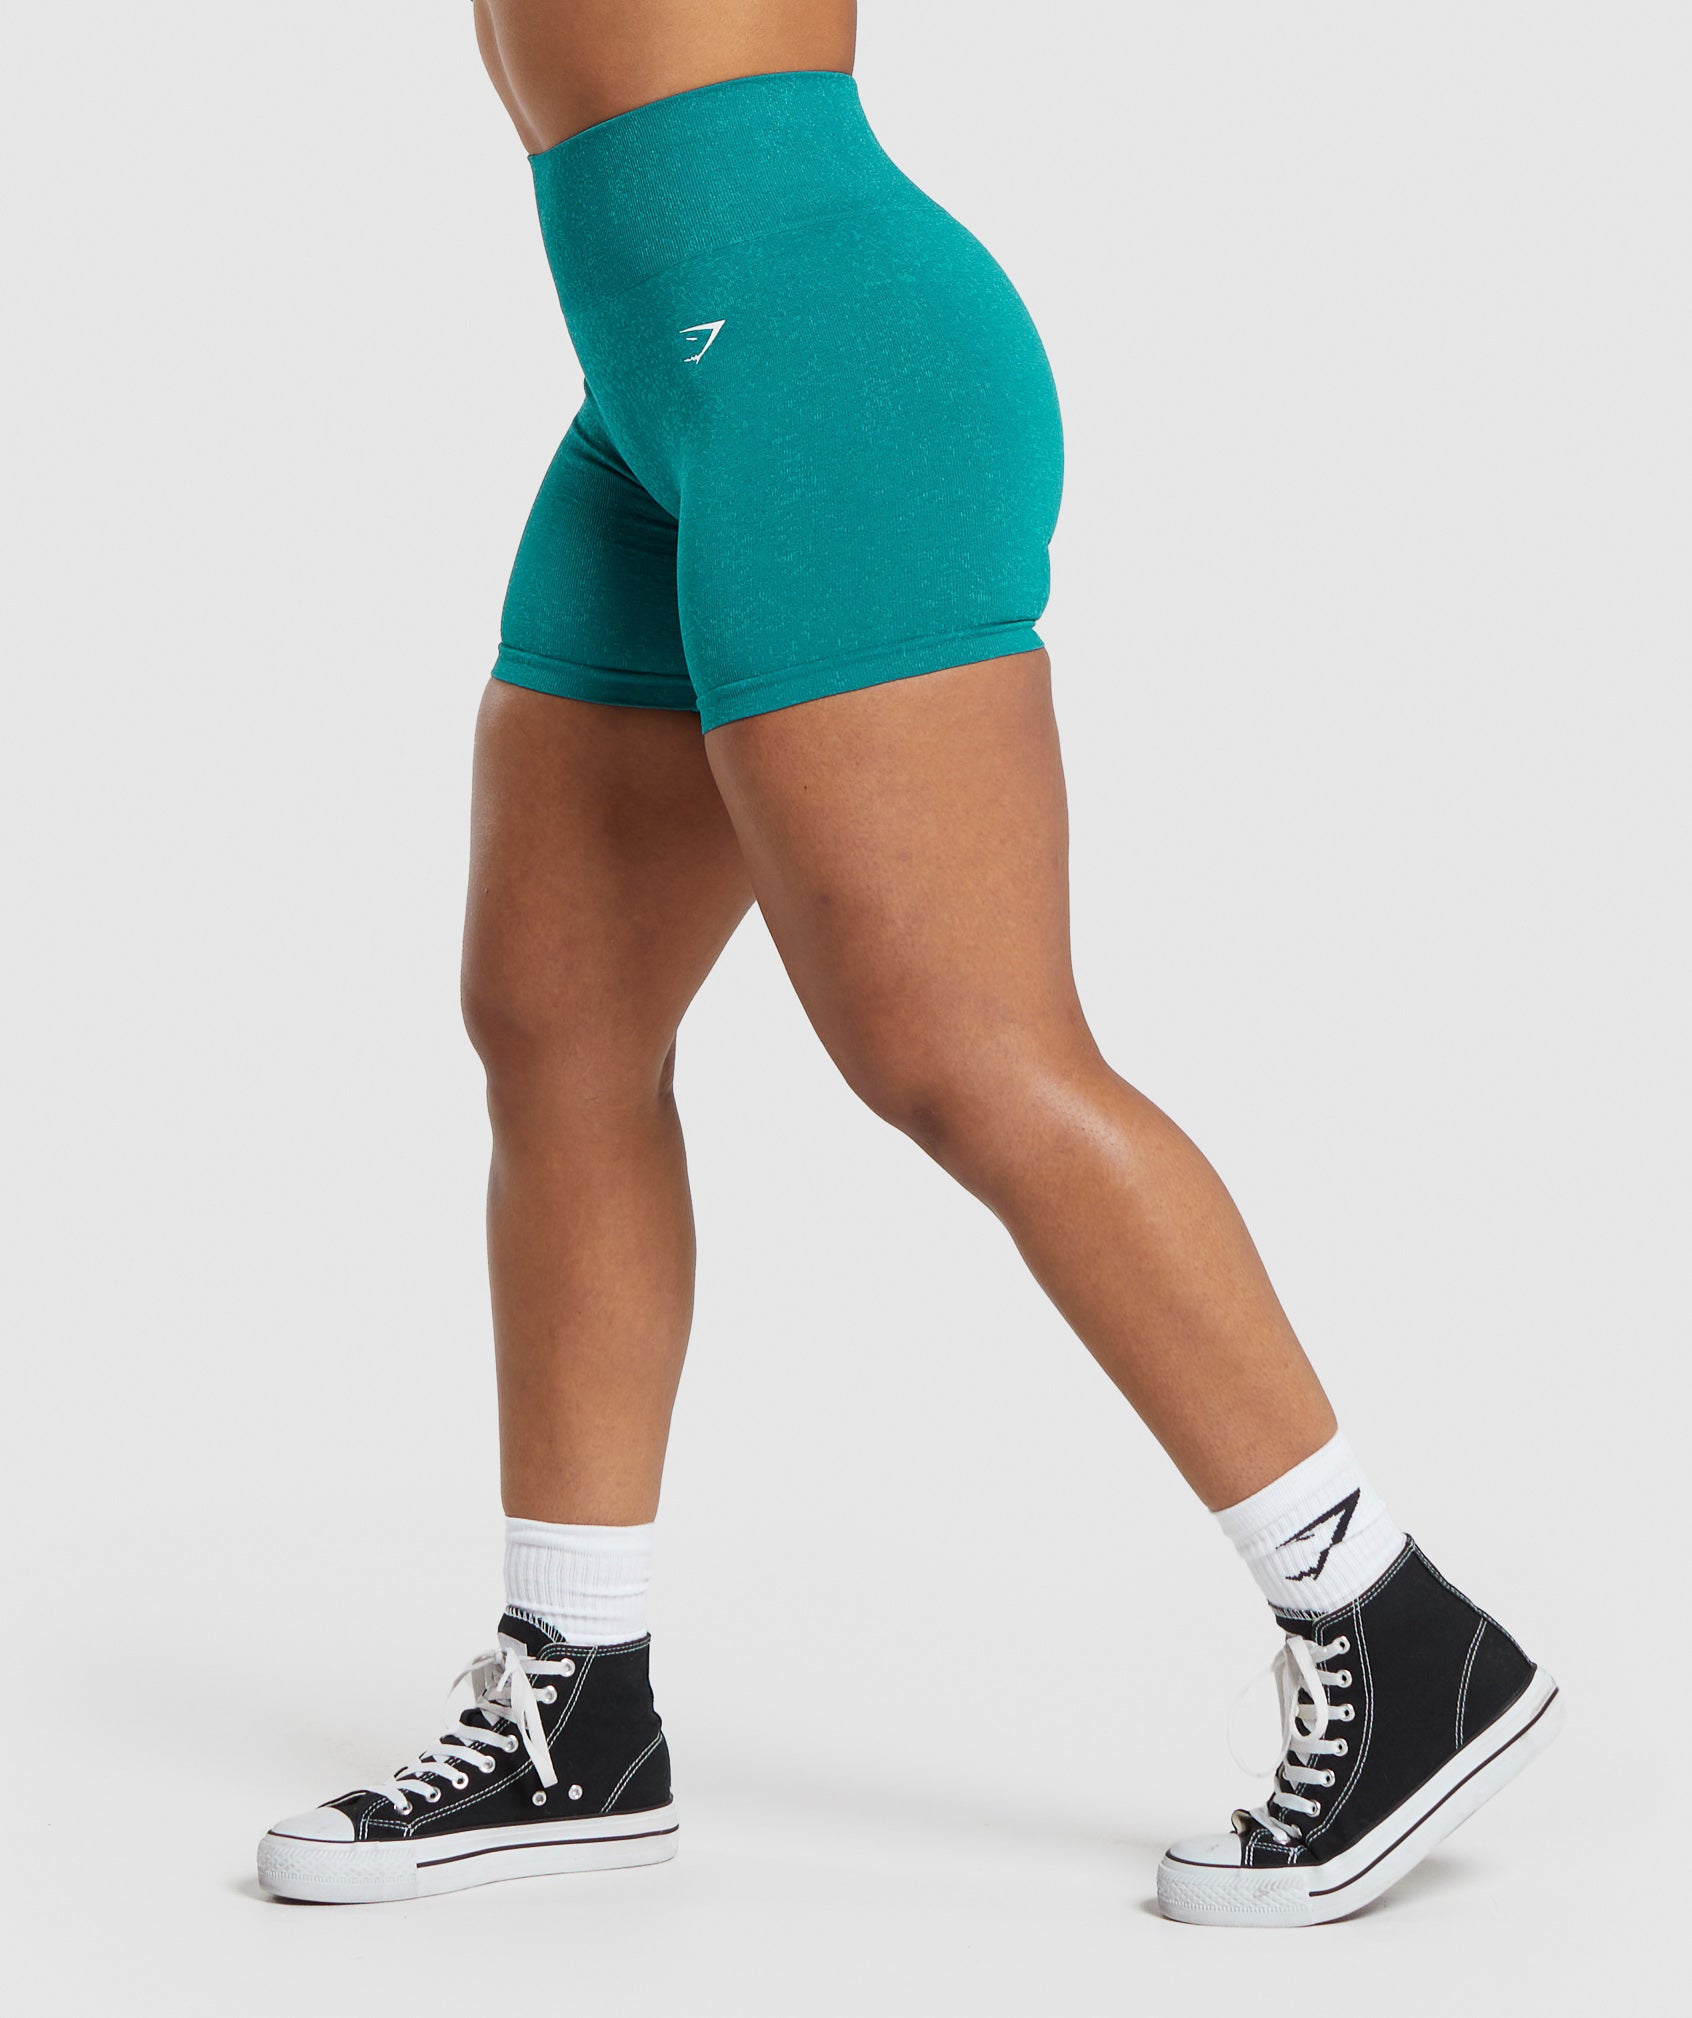 Adapt Fleck Seamless Shorts in Ocean Teal/Artificial Teal - view 3